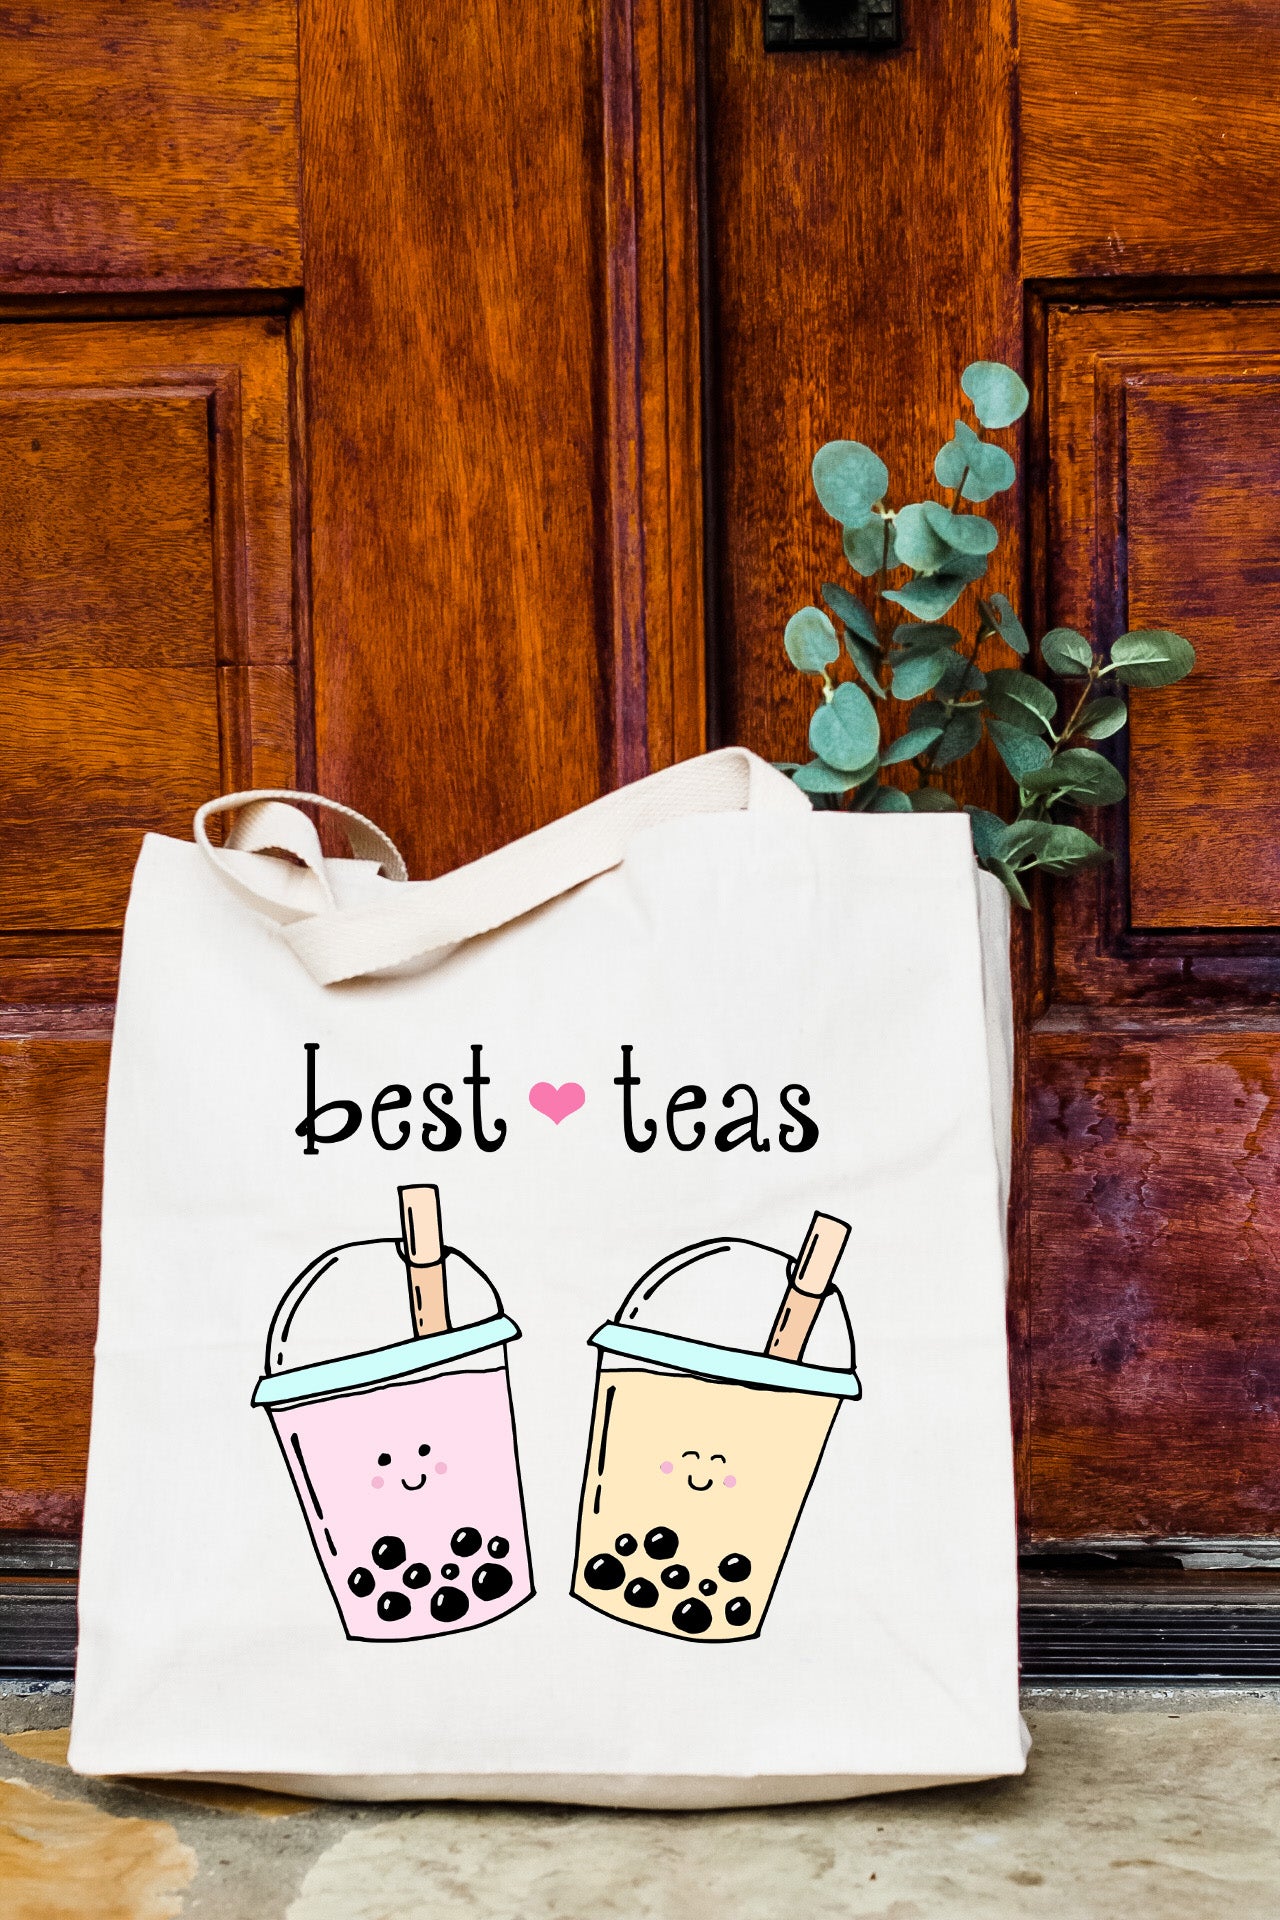 a tote bag that says best teas on it